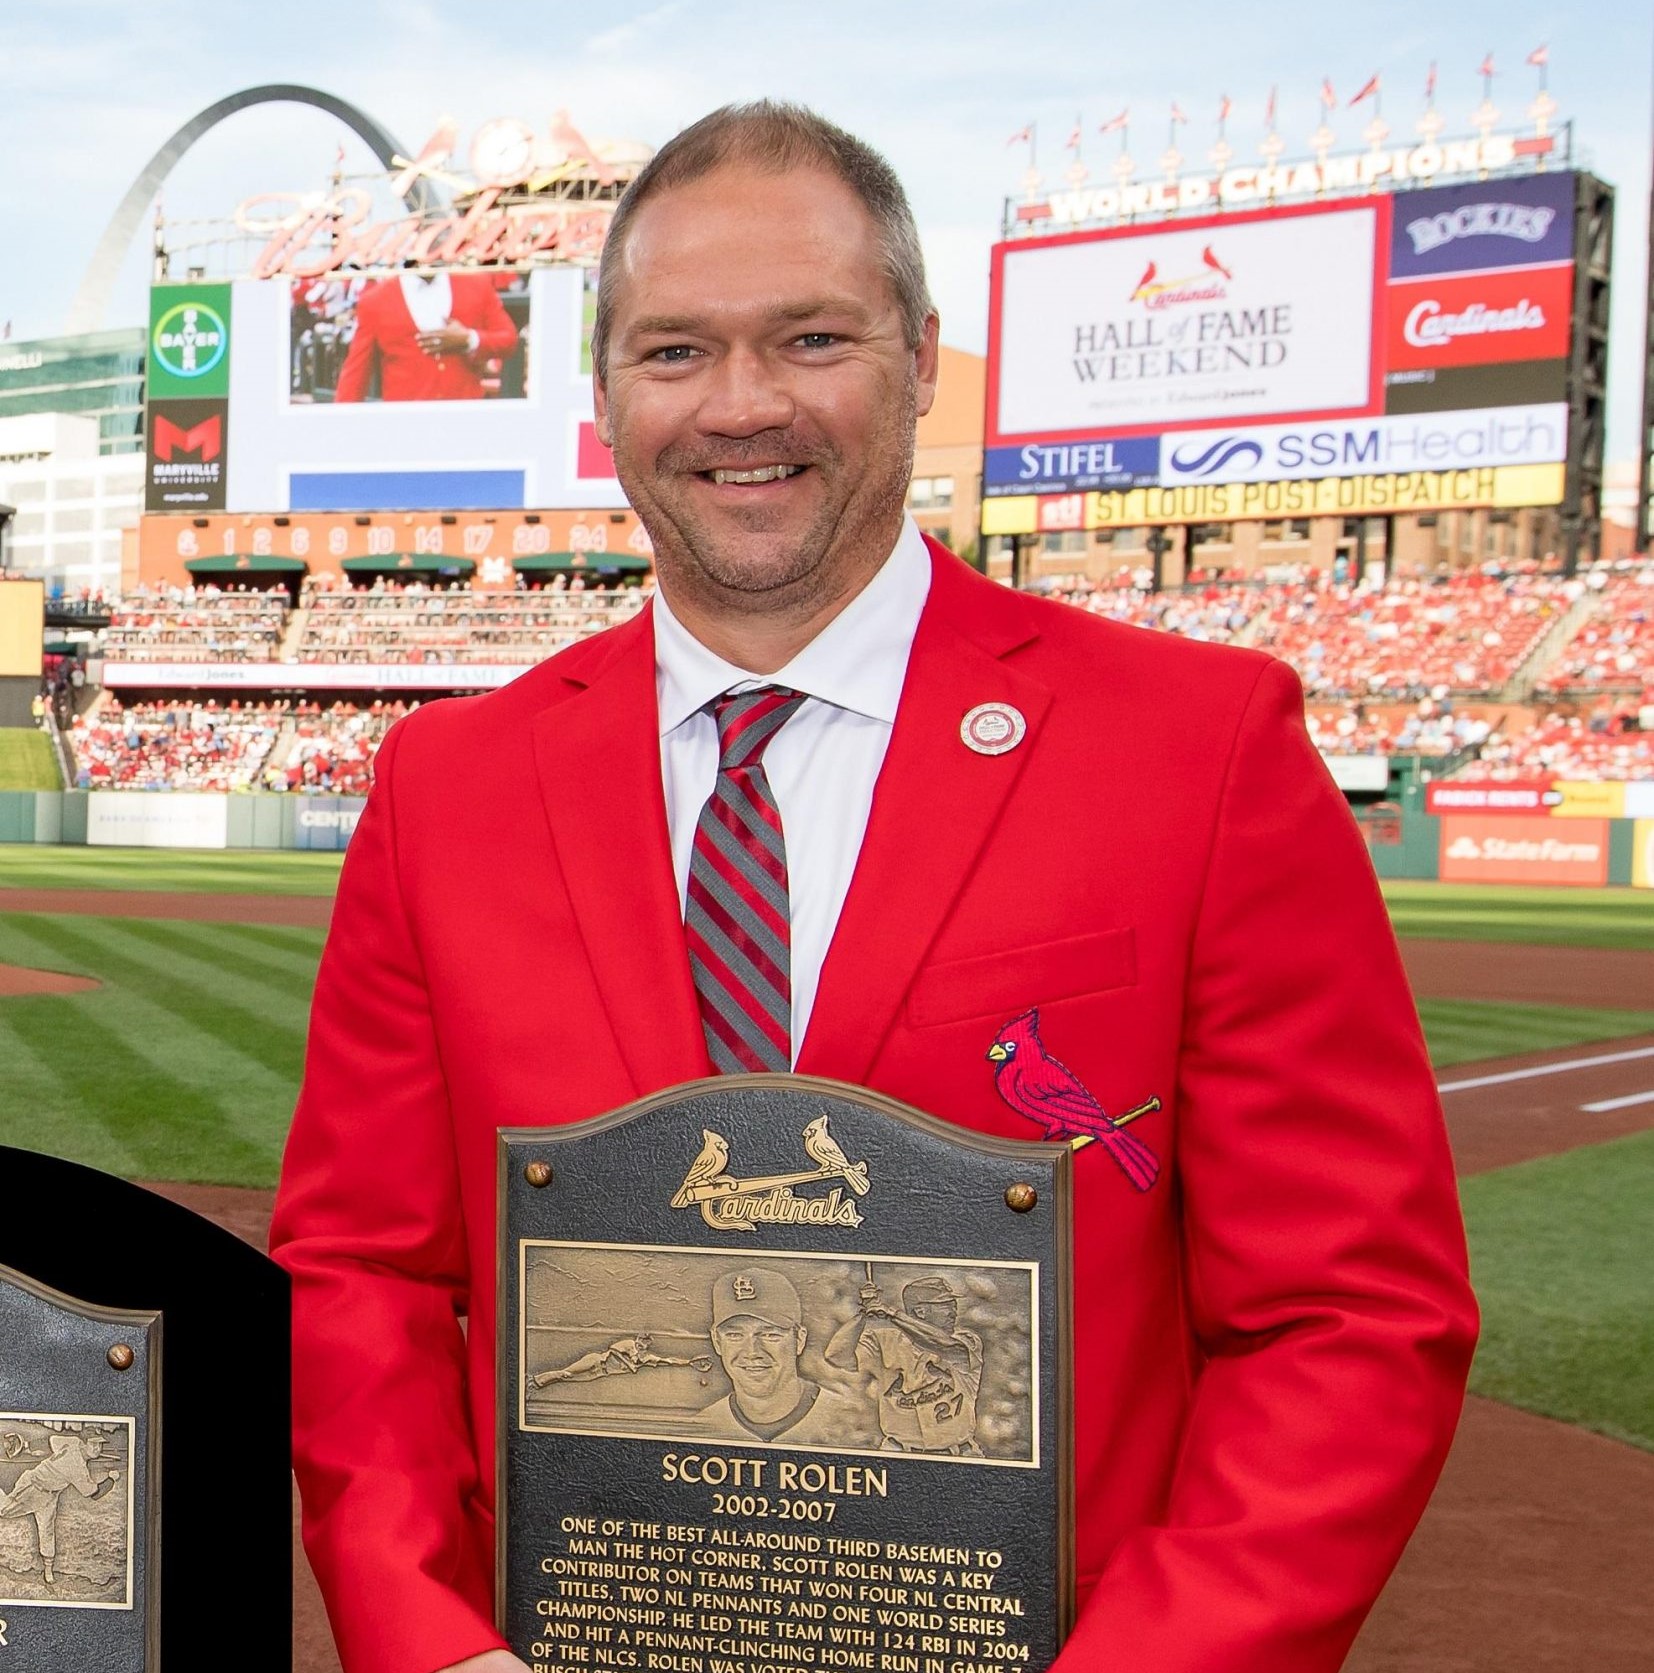 Scott Rolen will have a cardinal on his Hall of Fame plaque